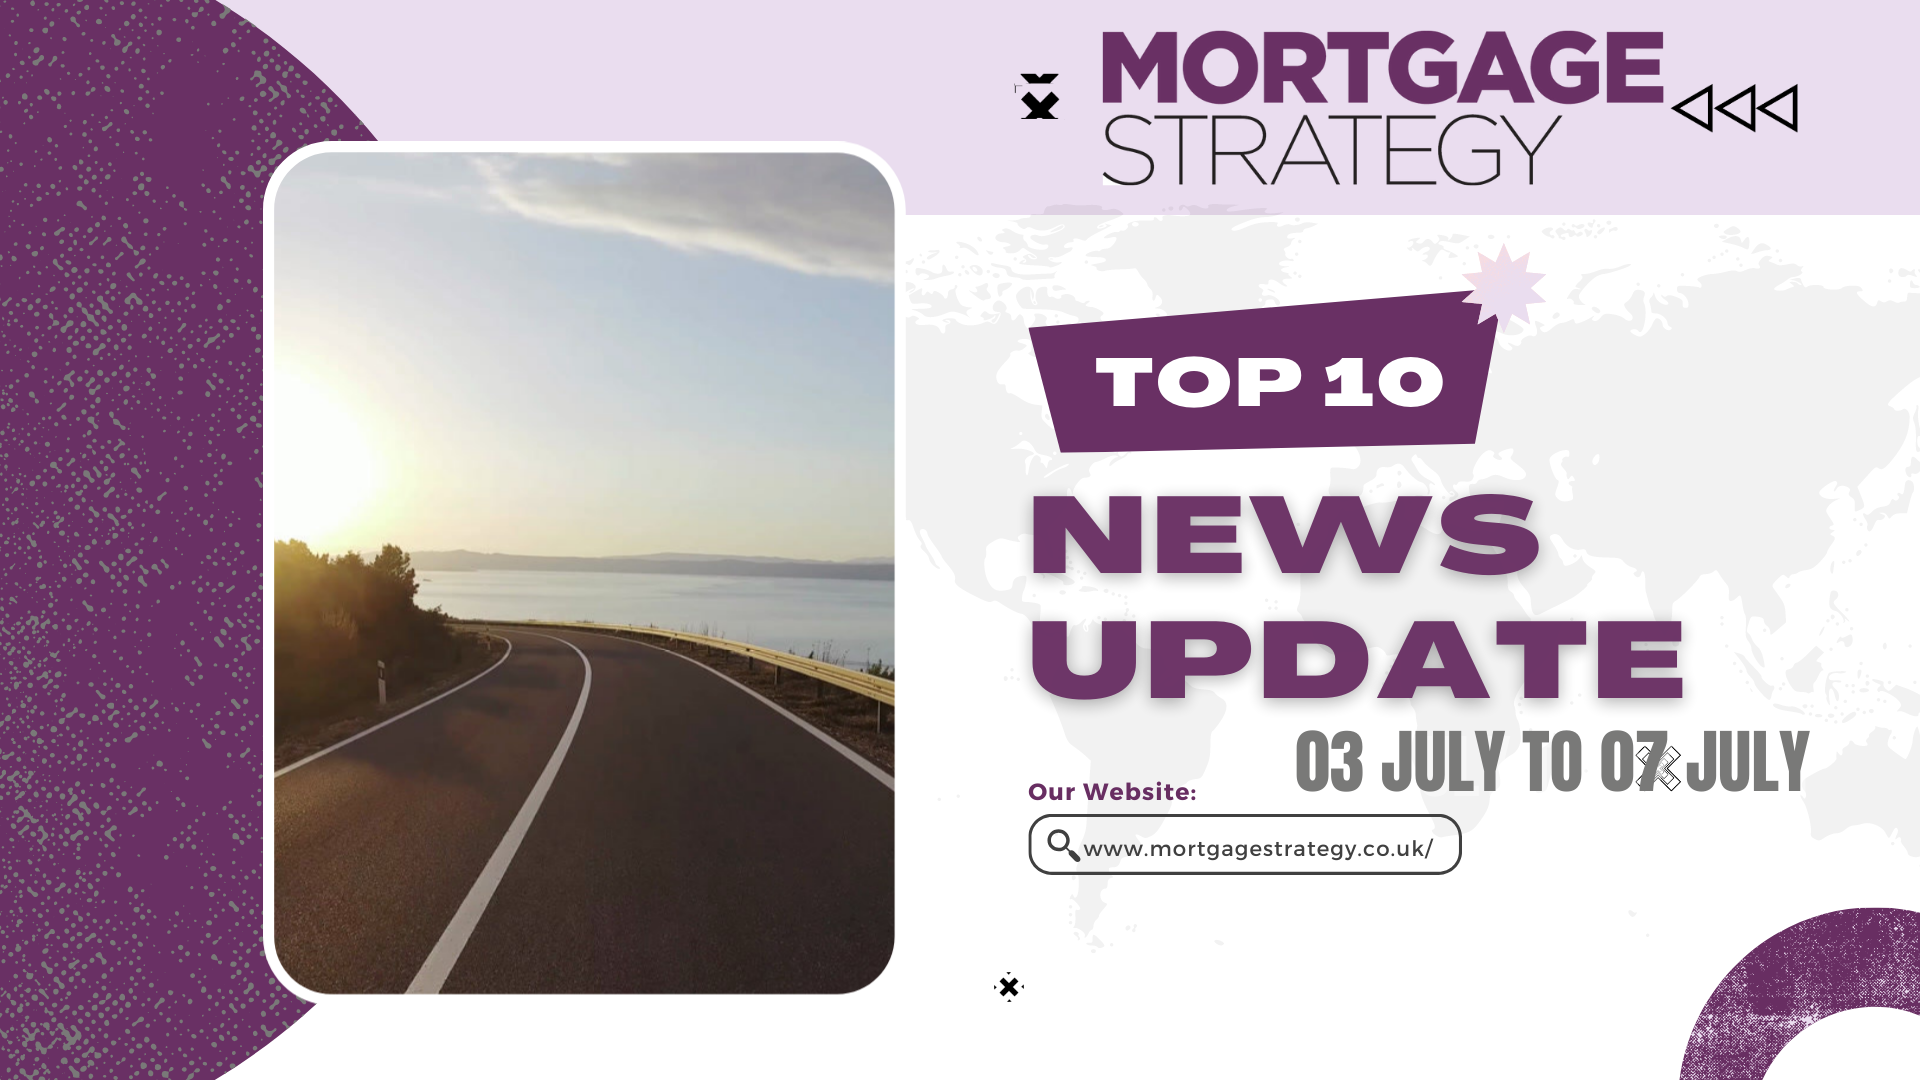 Mortgage-Strategys-Top-10-Stories-03-July-to-07-July.png